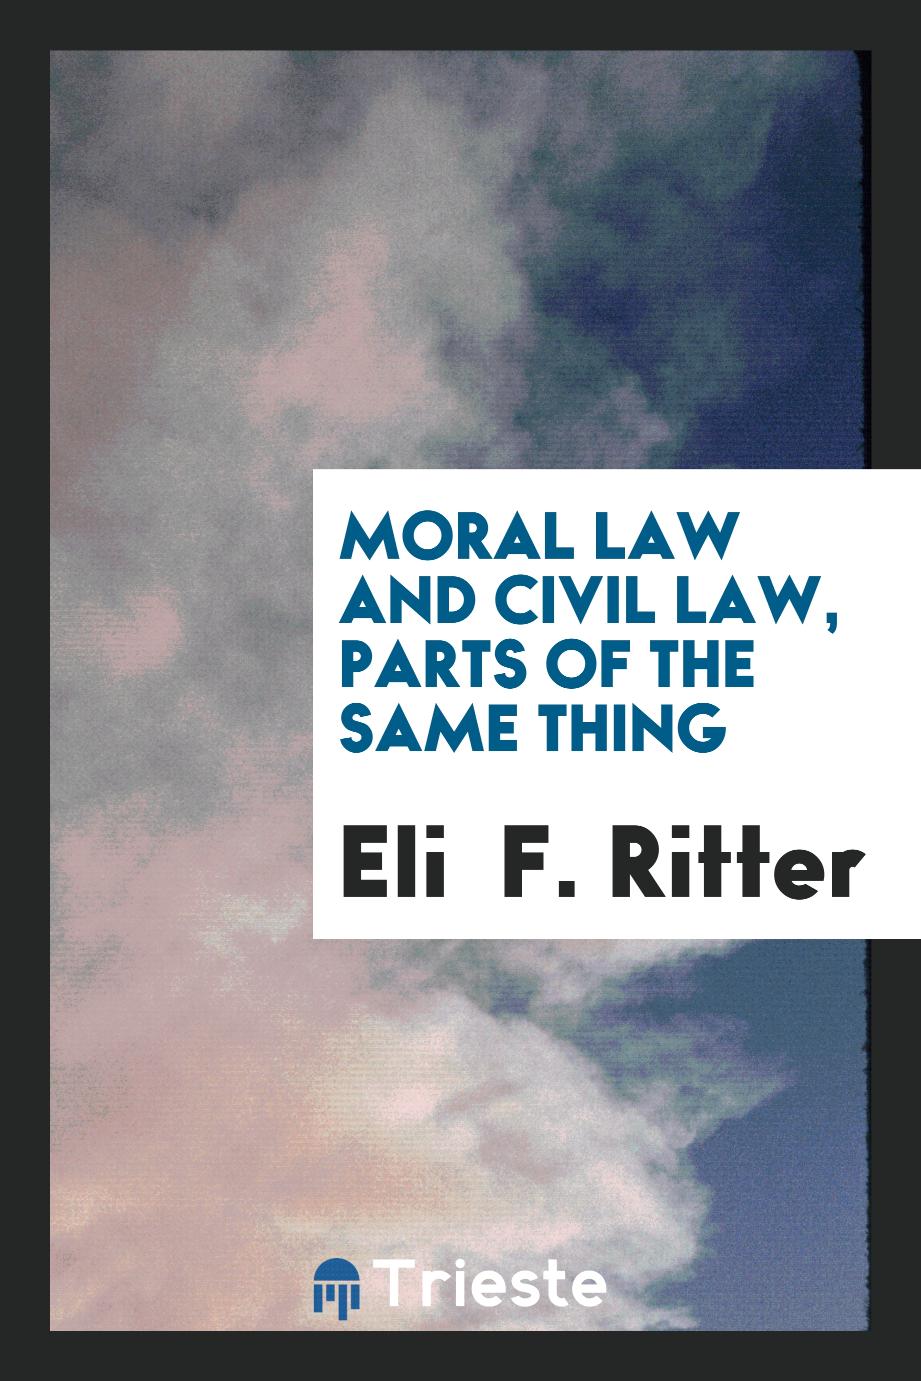 Moral law and civil law, parts of the same thing